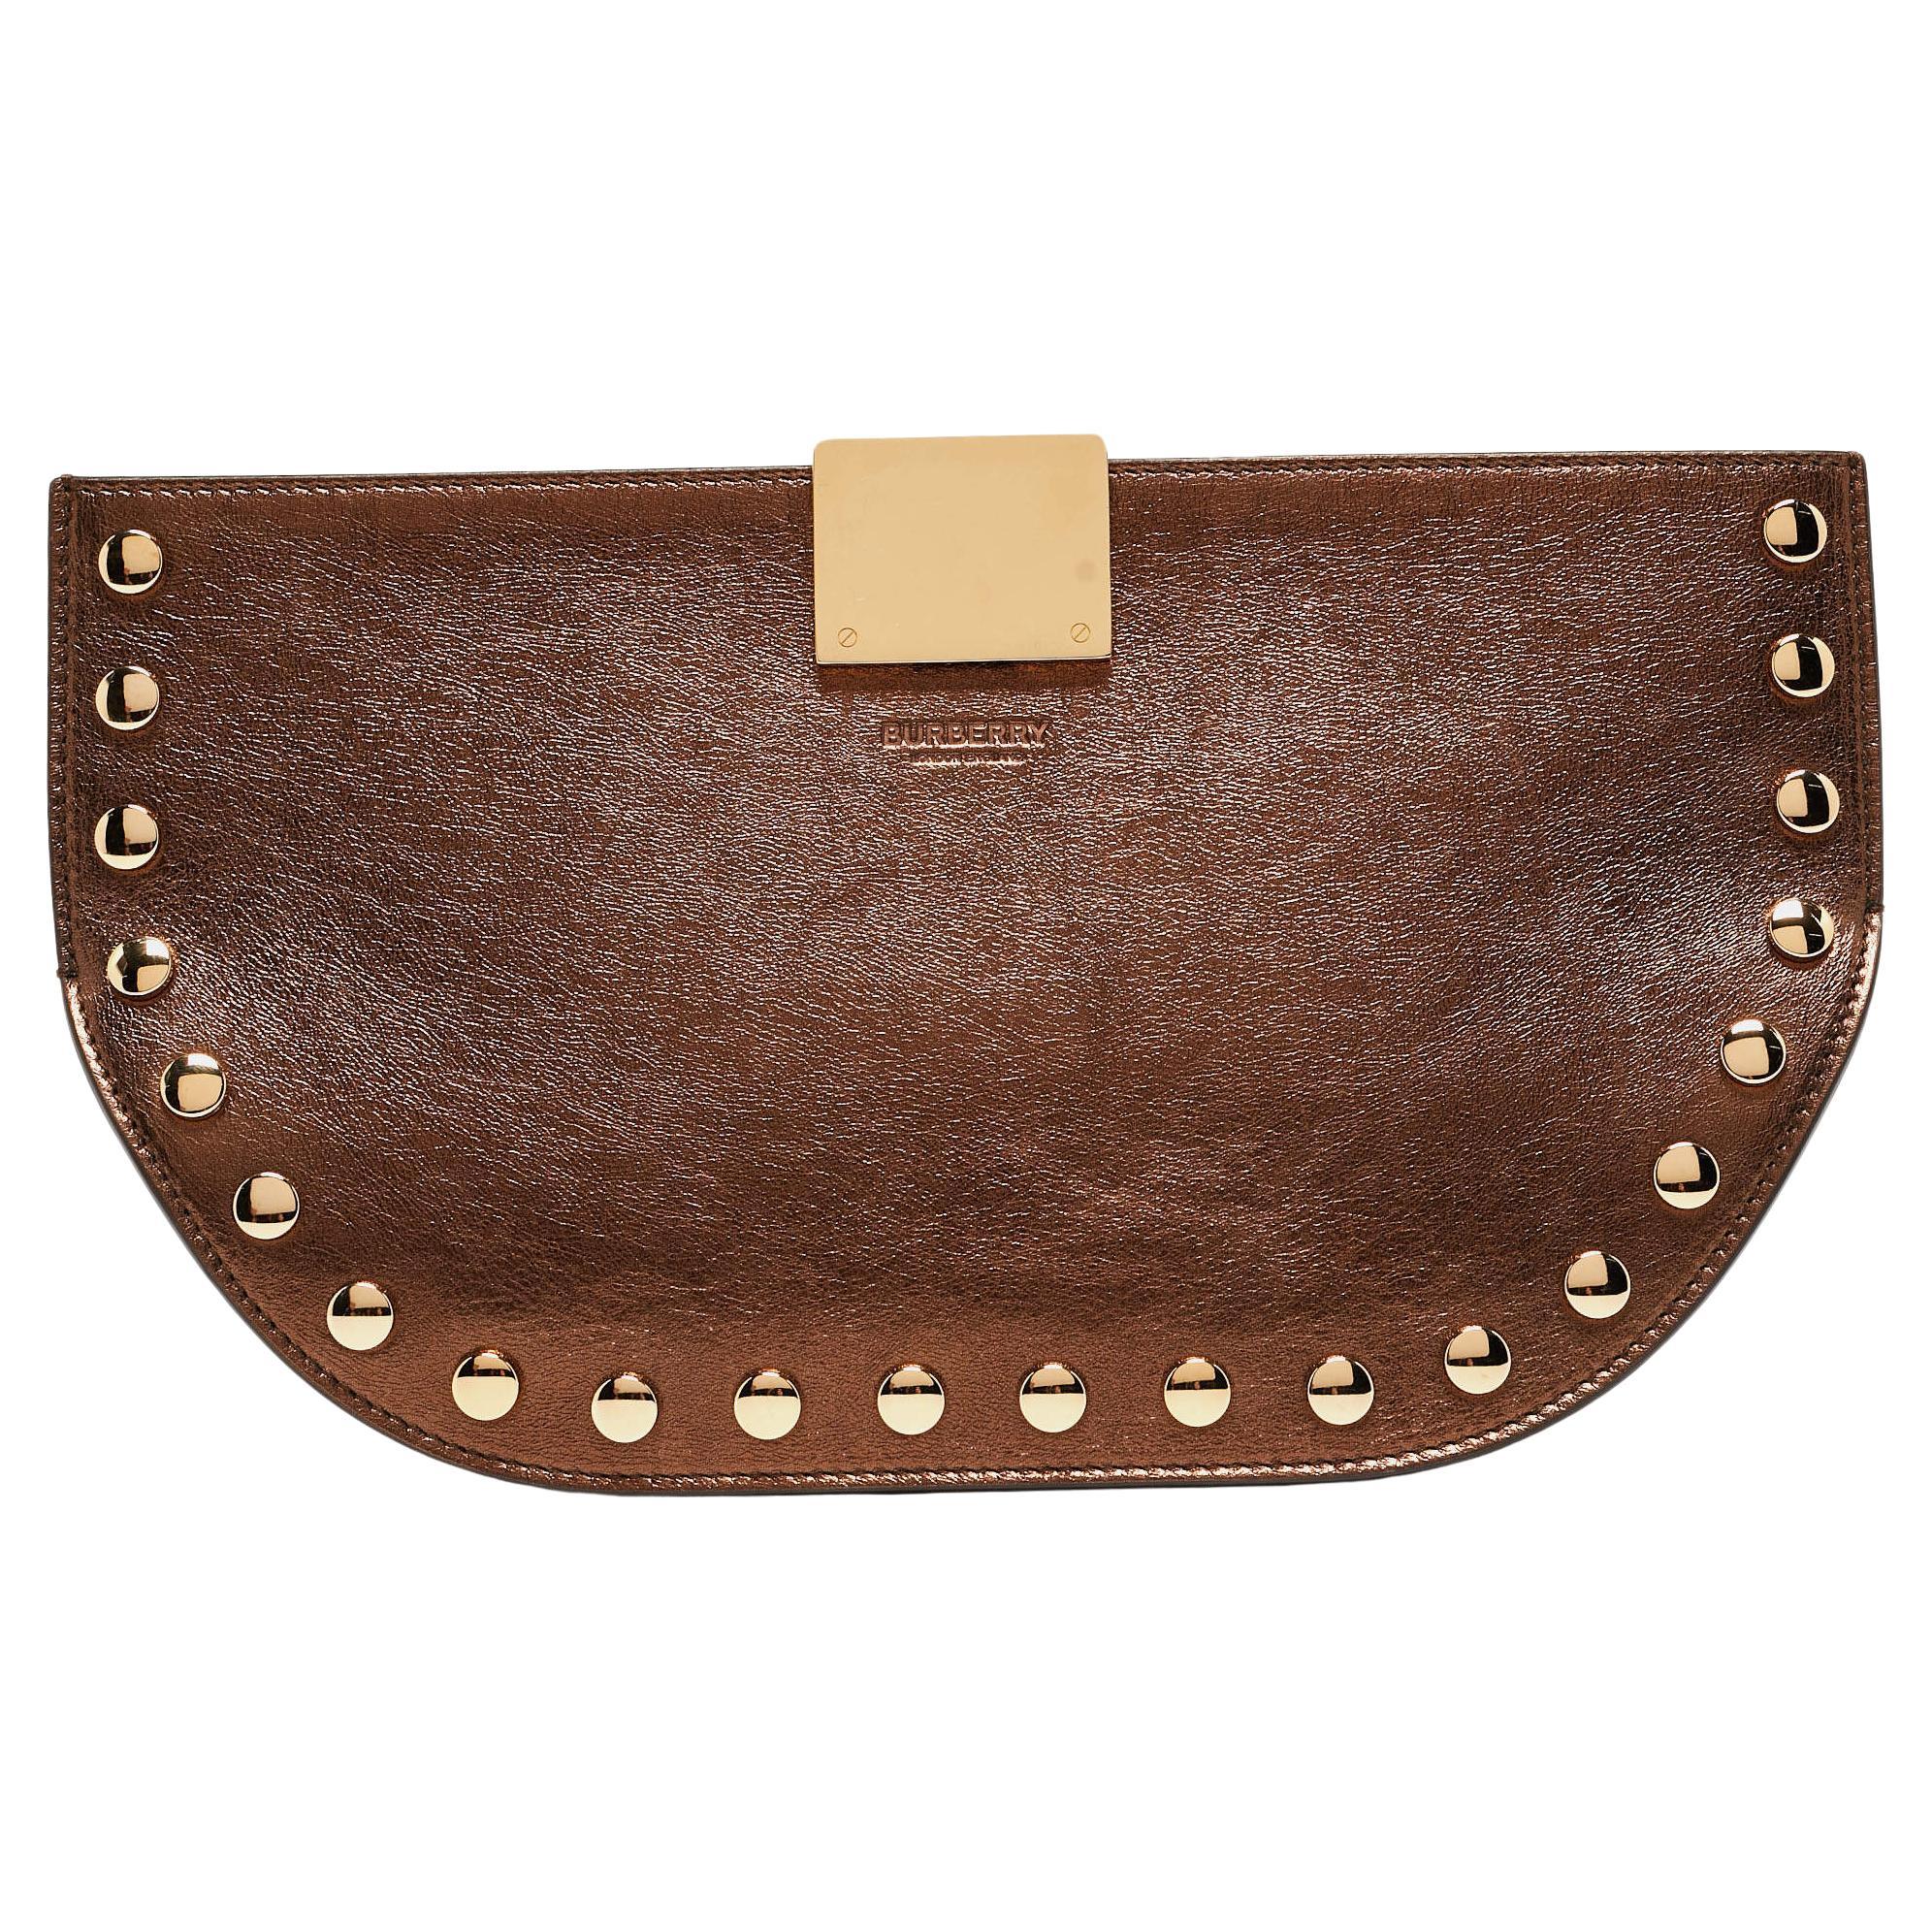 Burberry Bronze Leather Studded Olympia Clutch For Sale